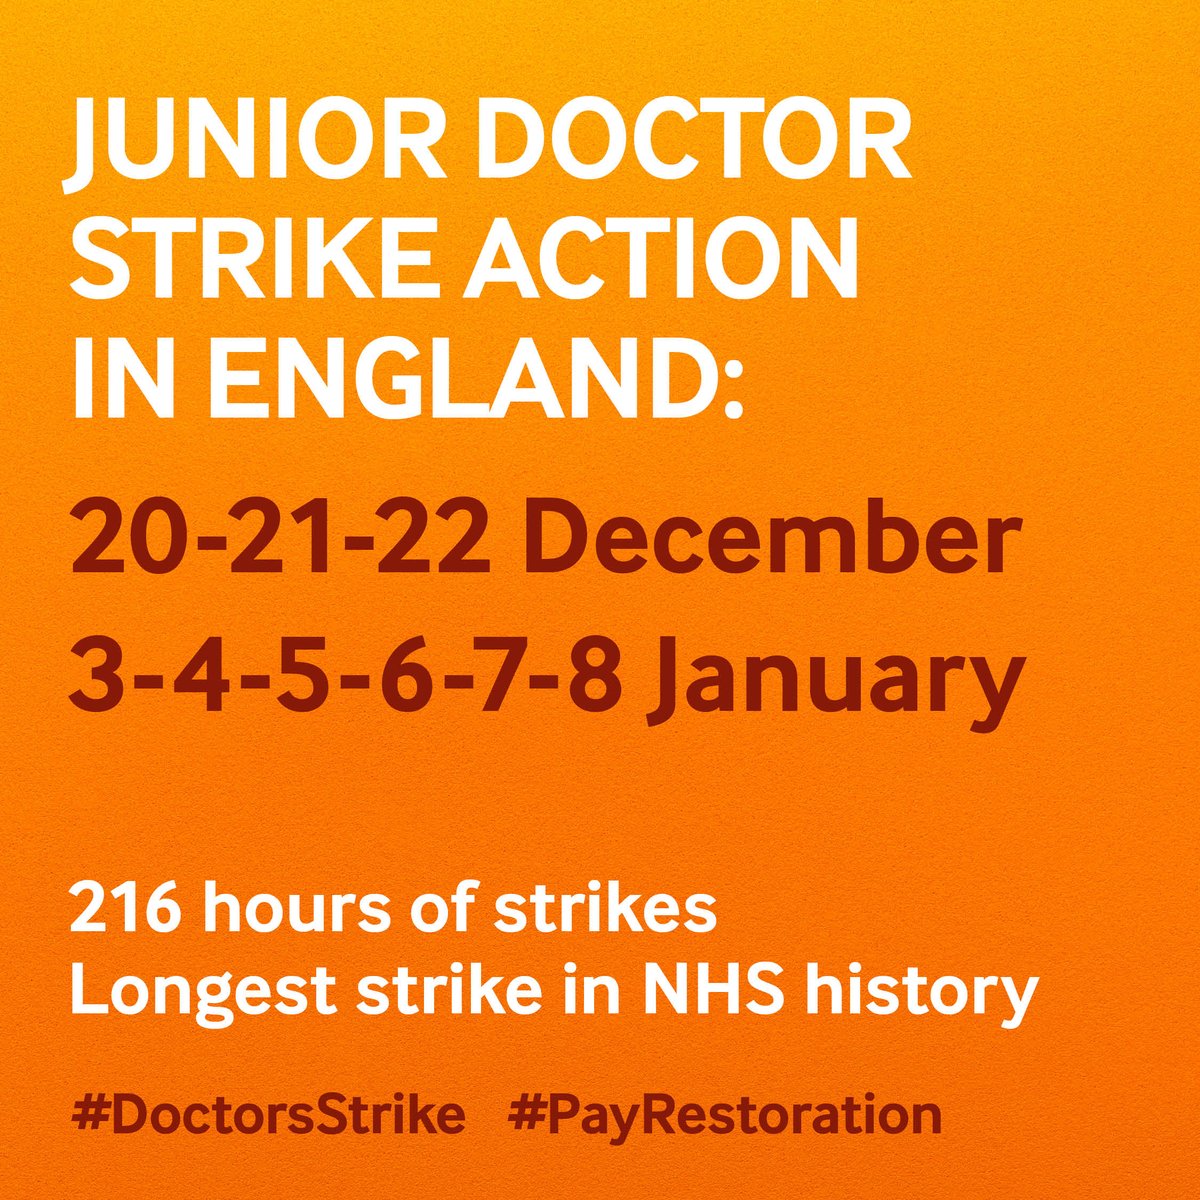 Our next strike action in England starts tomorrow at 7am. Junior doctors should not attend any shifts starting after 6.59am tomorrow up until shifts starting after 6.59am on Saturday. Read the full guidance 👇 bma.org.uk/our-campaigns/…